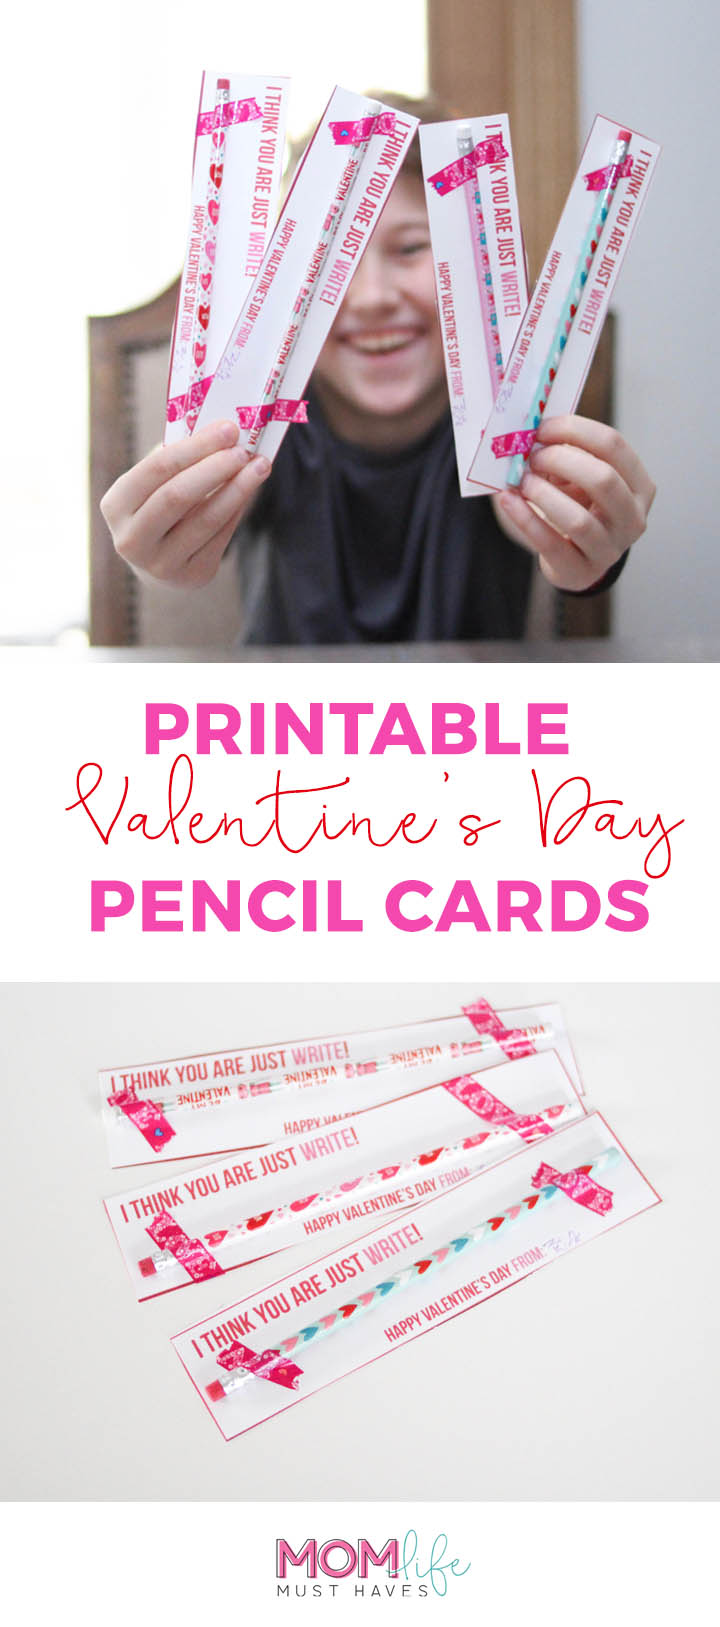 Free printable Valentine's Day cards for kids, DIY Valentine's for school from momlifemusthaves.com